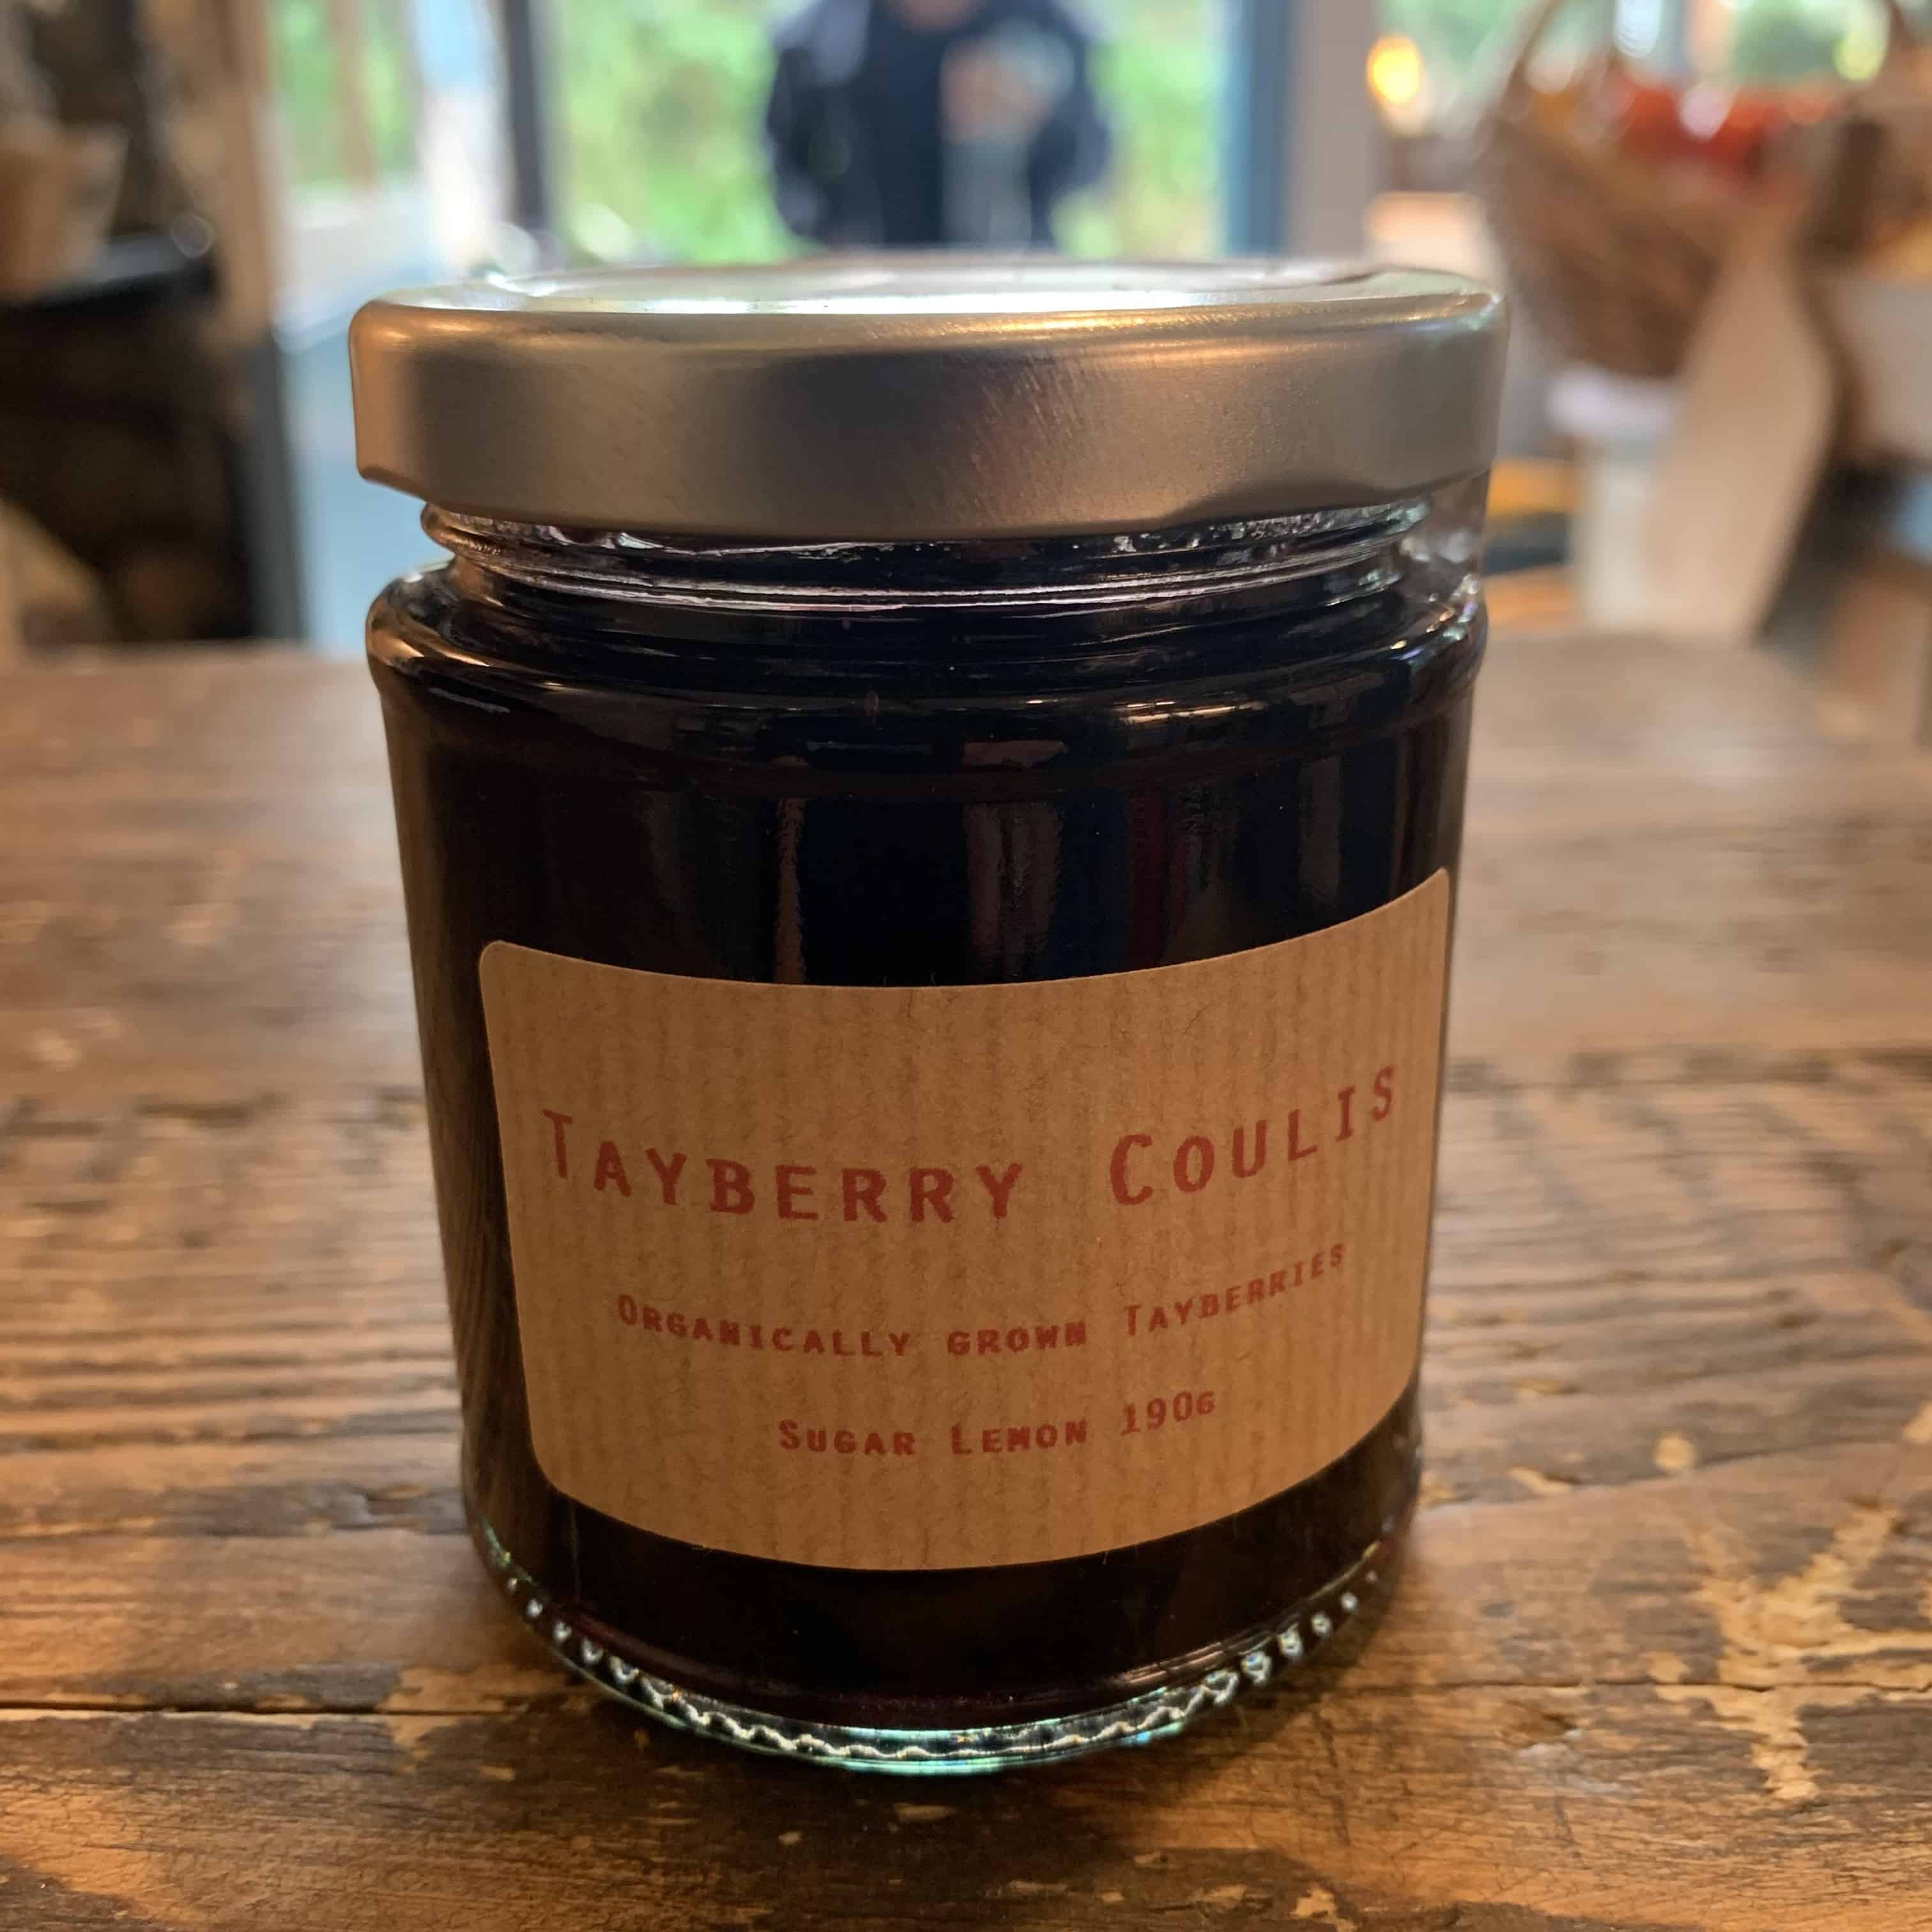 Tayberry Coulis